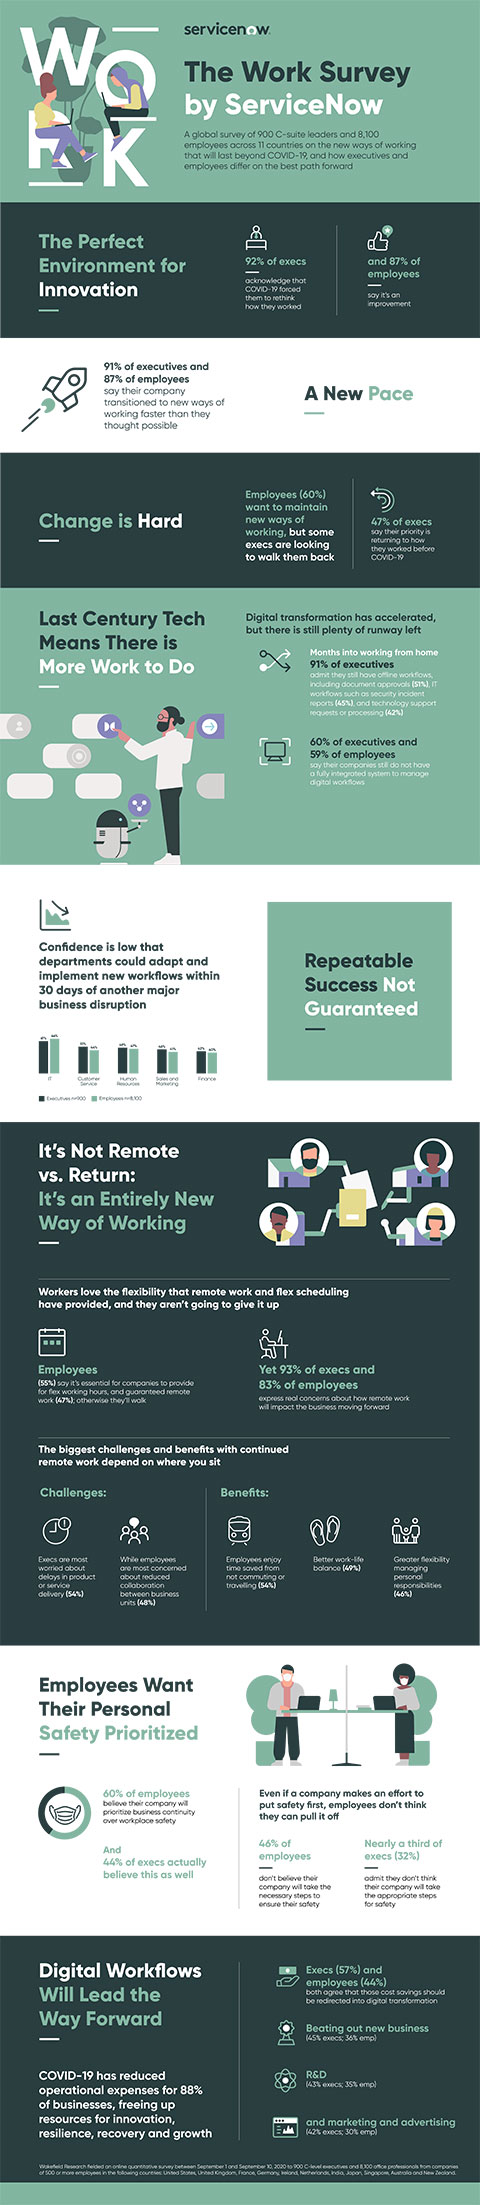 The Work Survey By ServiceNow Infographic (Graphic: Business Wire)